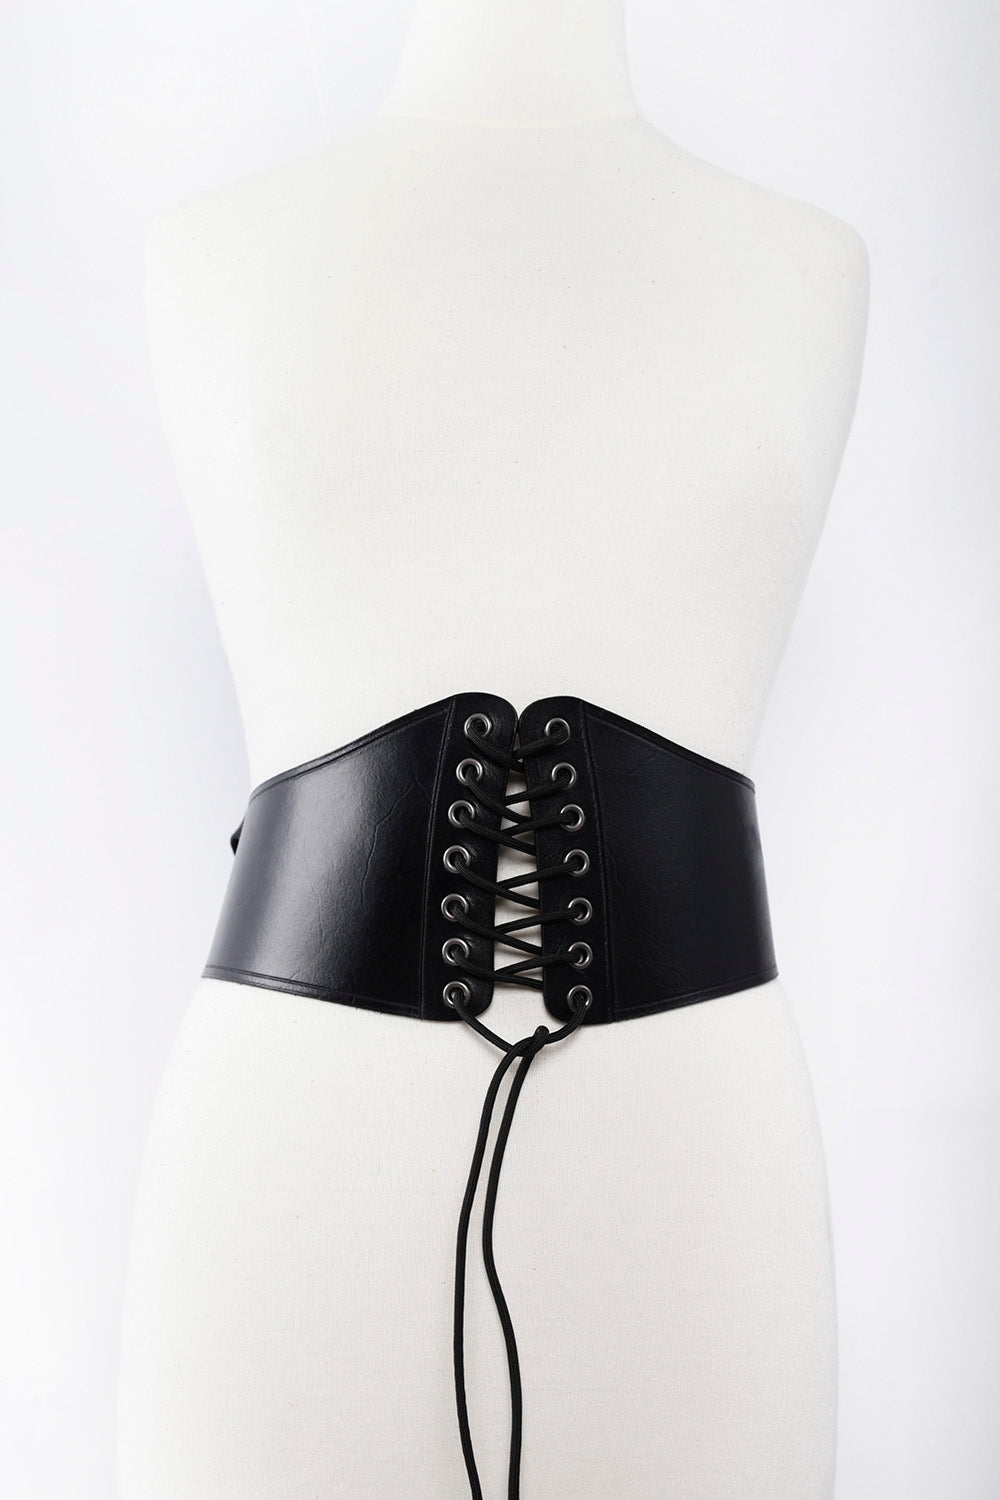 Buy wholesale Corset made of GENUINE leather in black